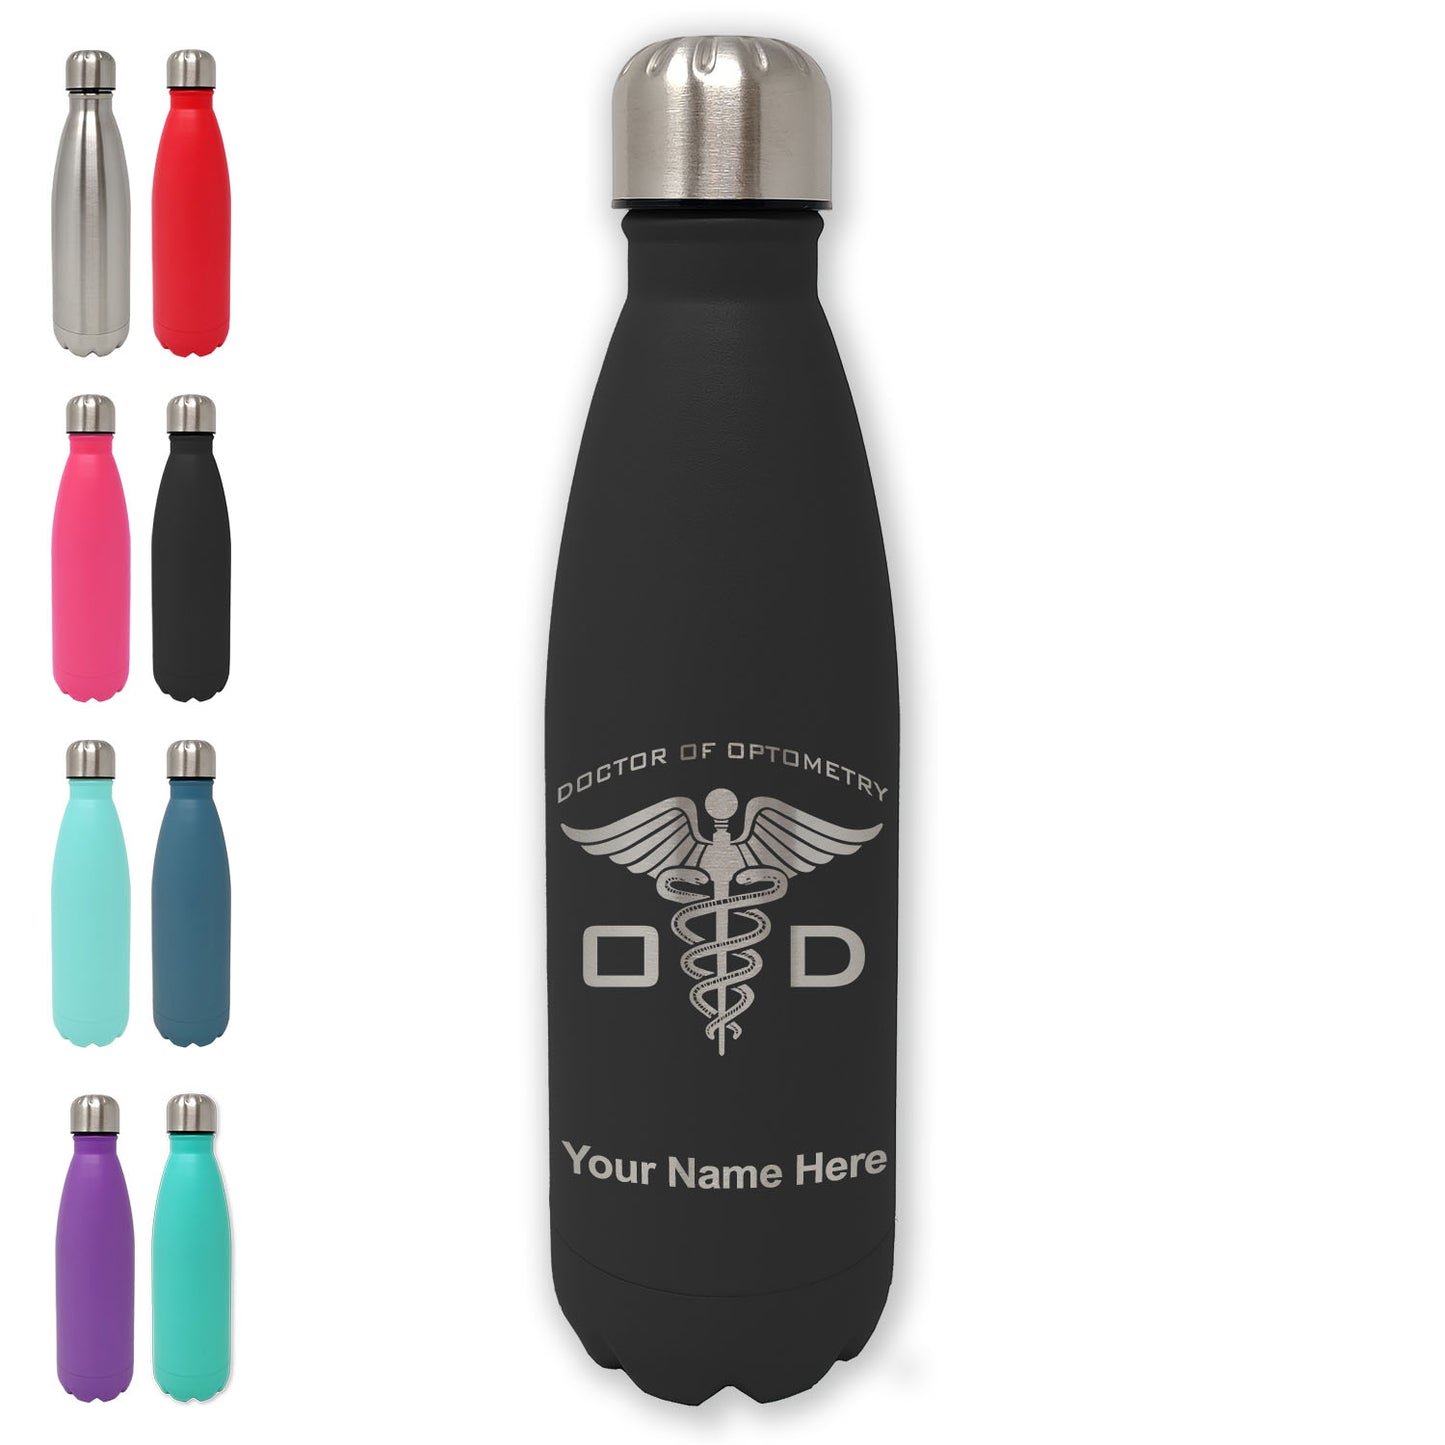 LaserGram Double Wall Water Bottle, OD Doctor of Optometry, Personalized Engraving Included